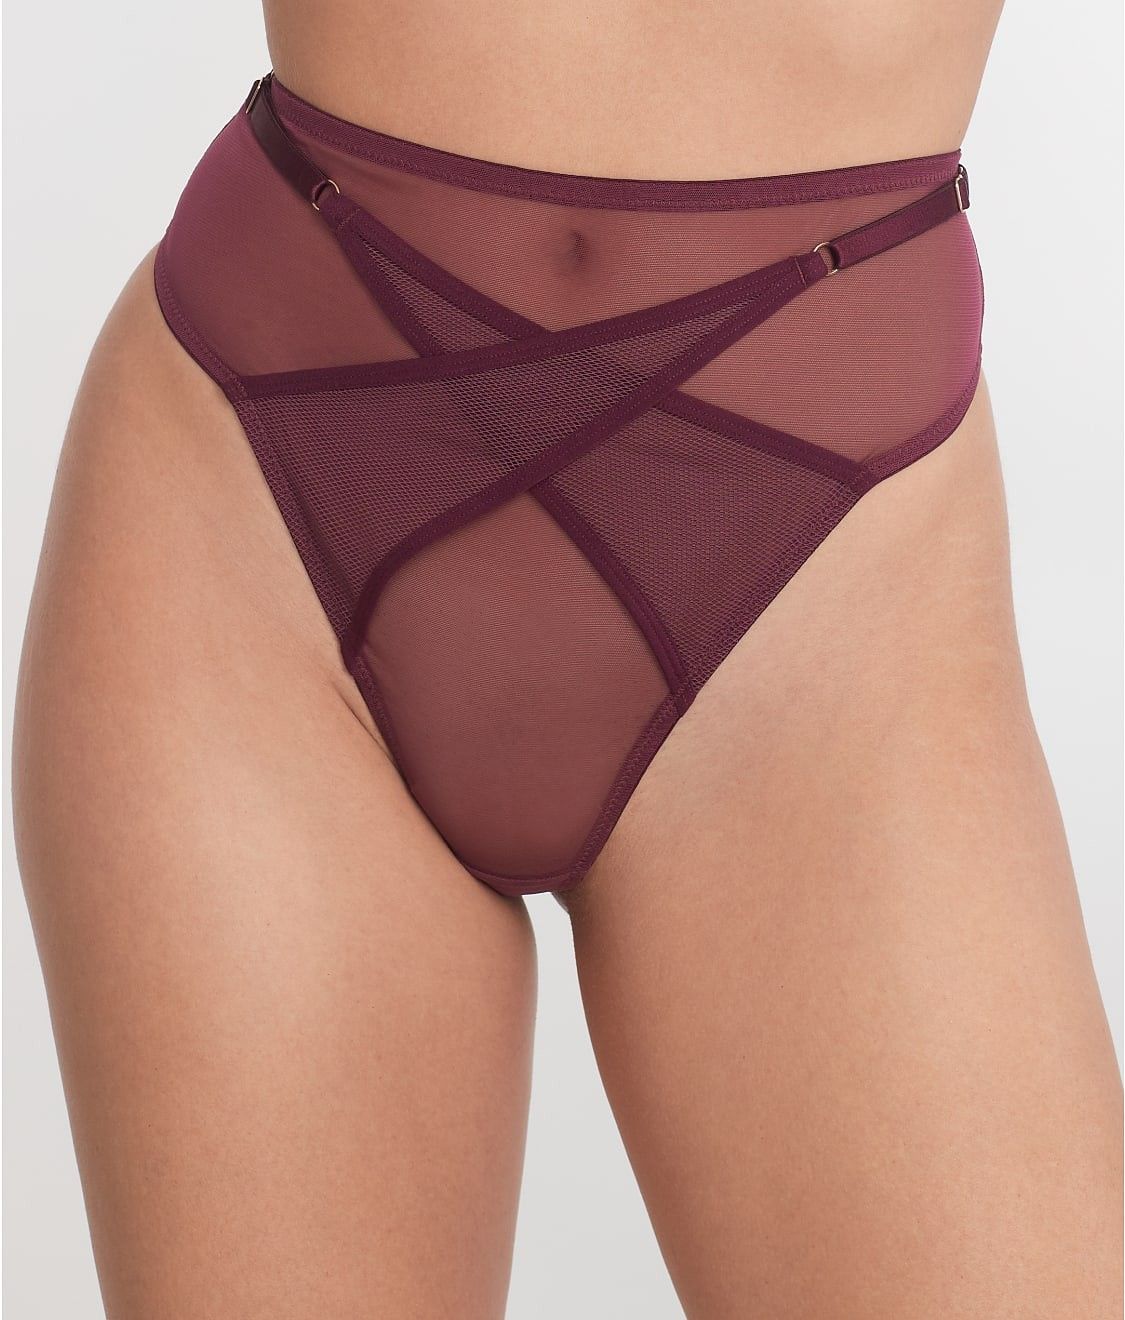 Buy Alion Women's Sexy Big and Tall Sheer Sexy Underwear Panties